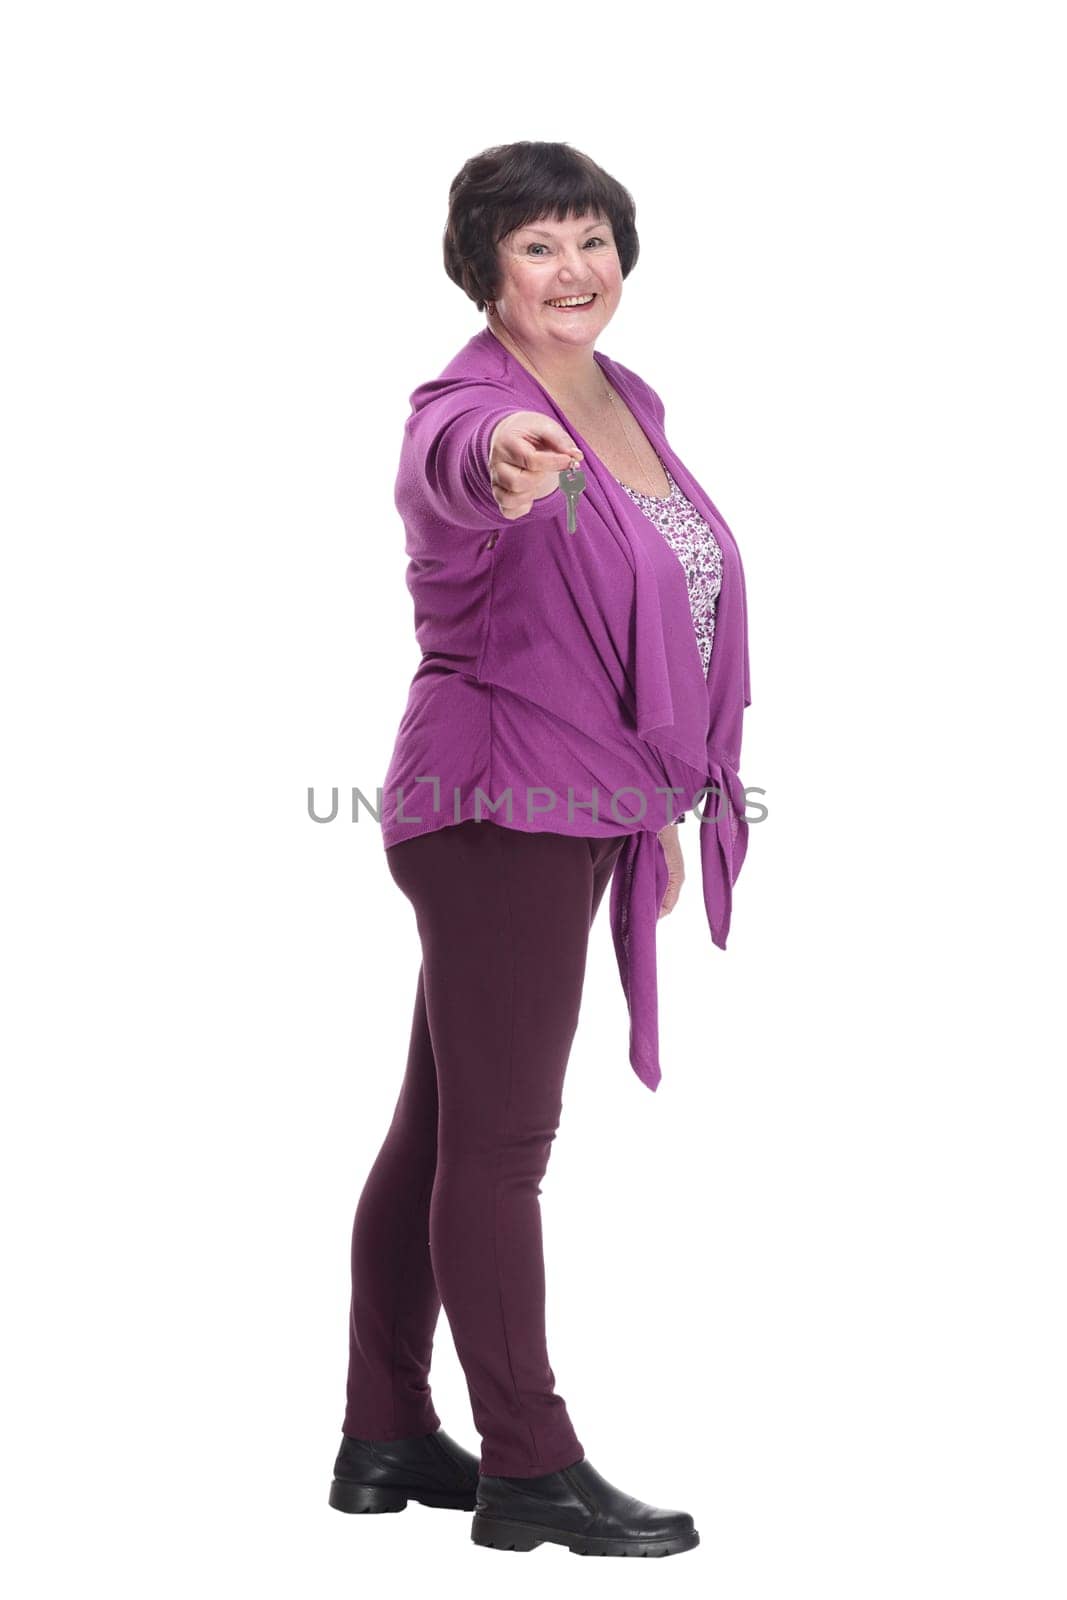 in full growth.happy senior woman with keys in hand. isolated on a white background.